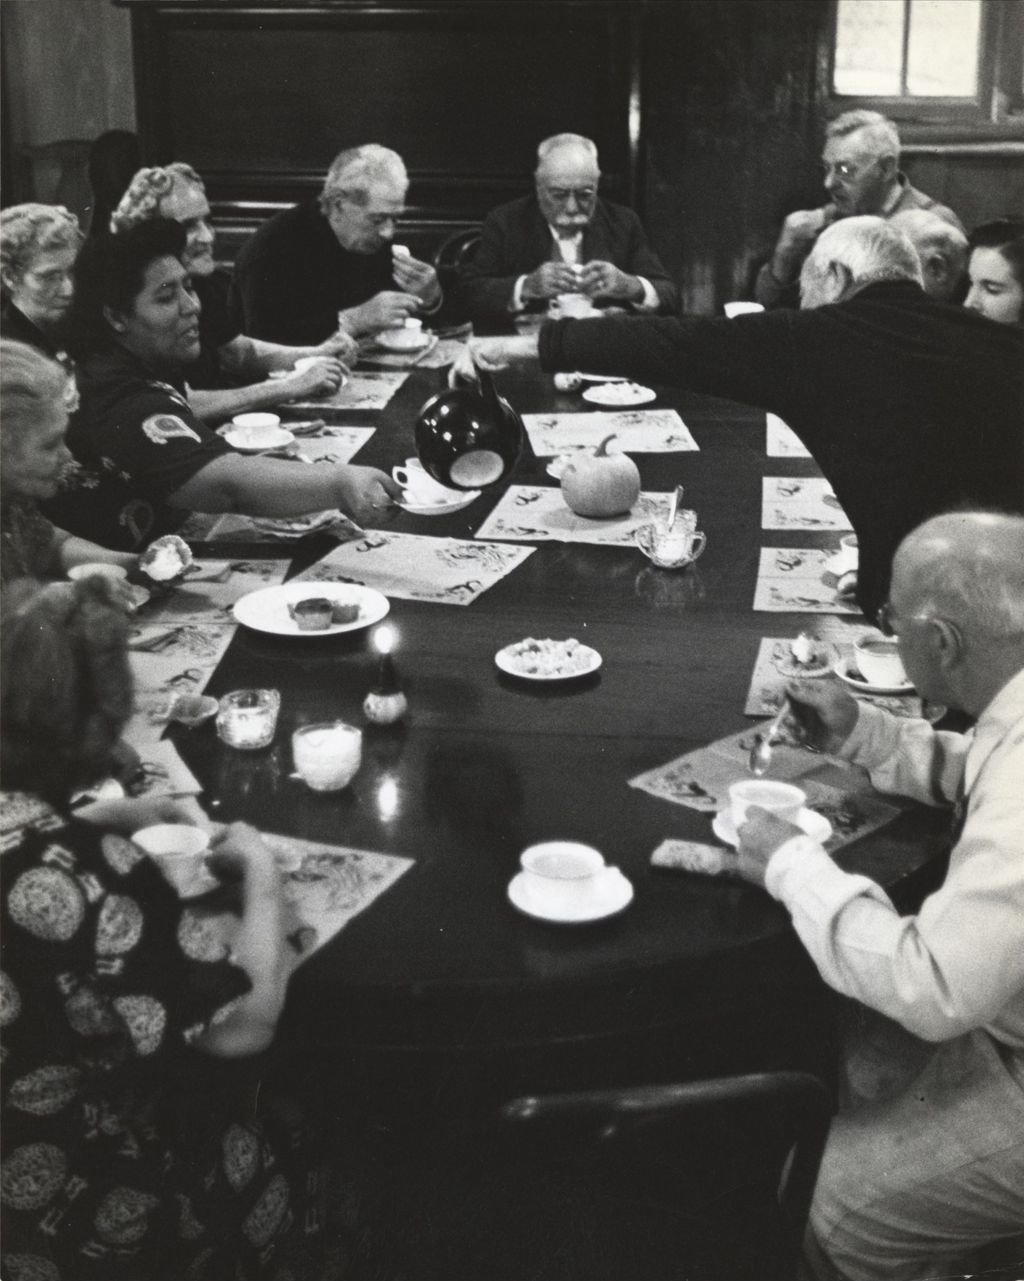 Members of the Hull-House senior citizens club having coffee or tea and cupcakes in the Residents Dining Hall